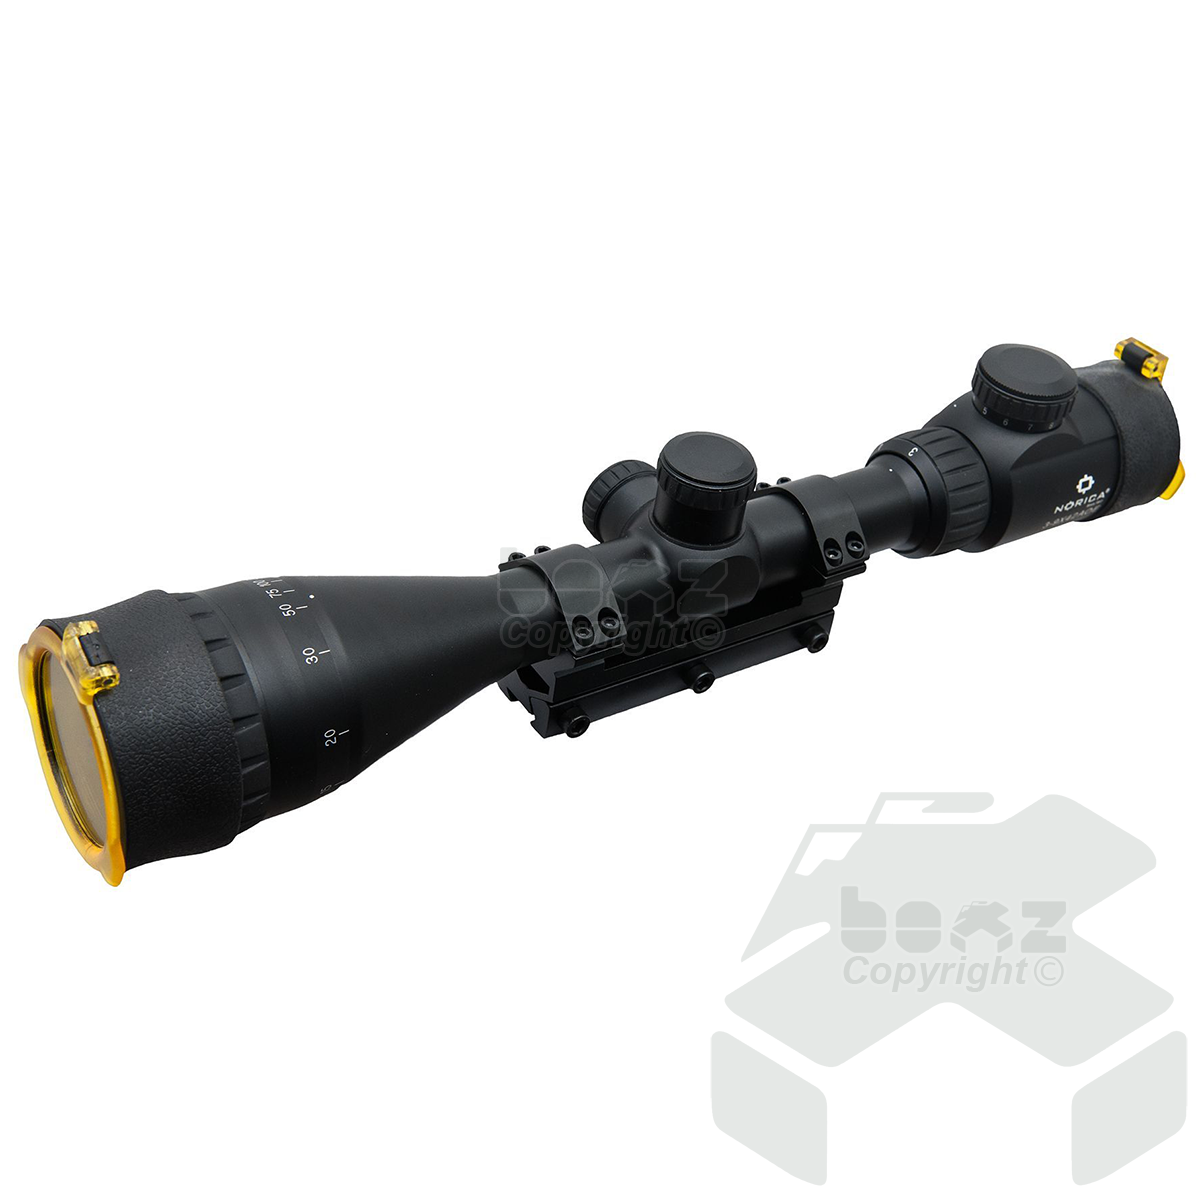 Norica Scope 3-9x42 AO Air King with One-Piece 3/8" Mount